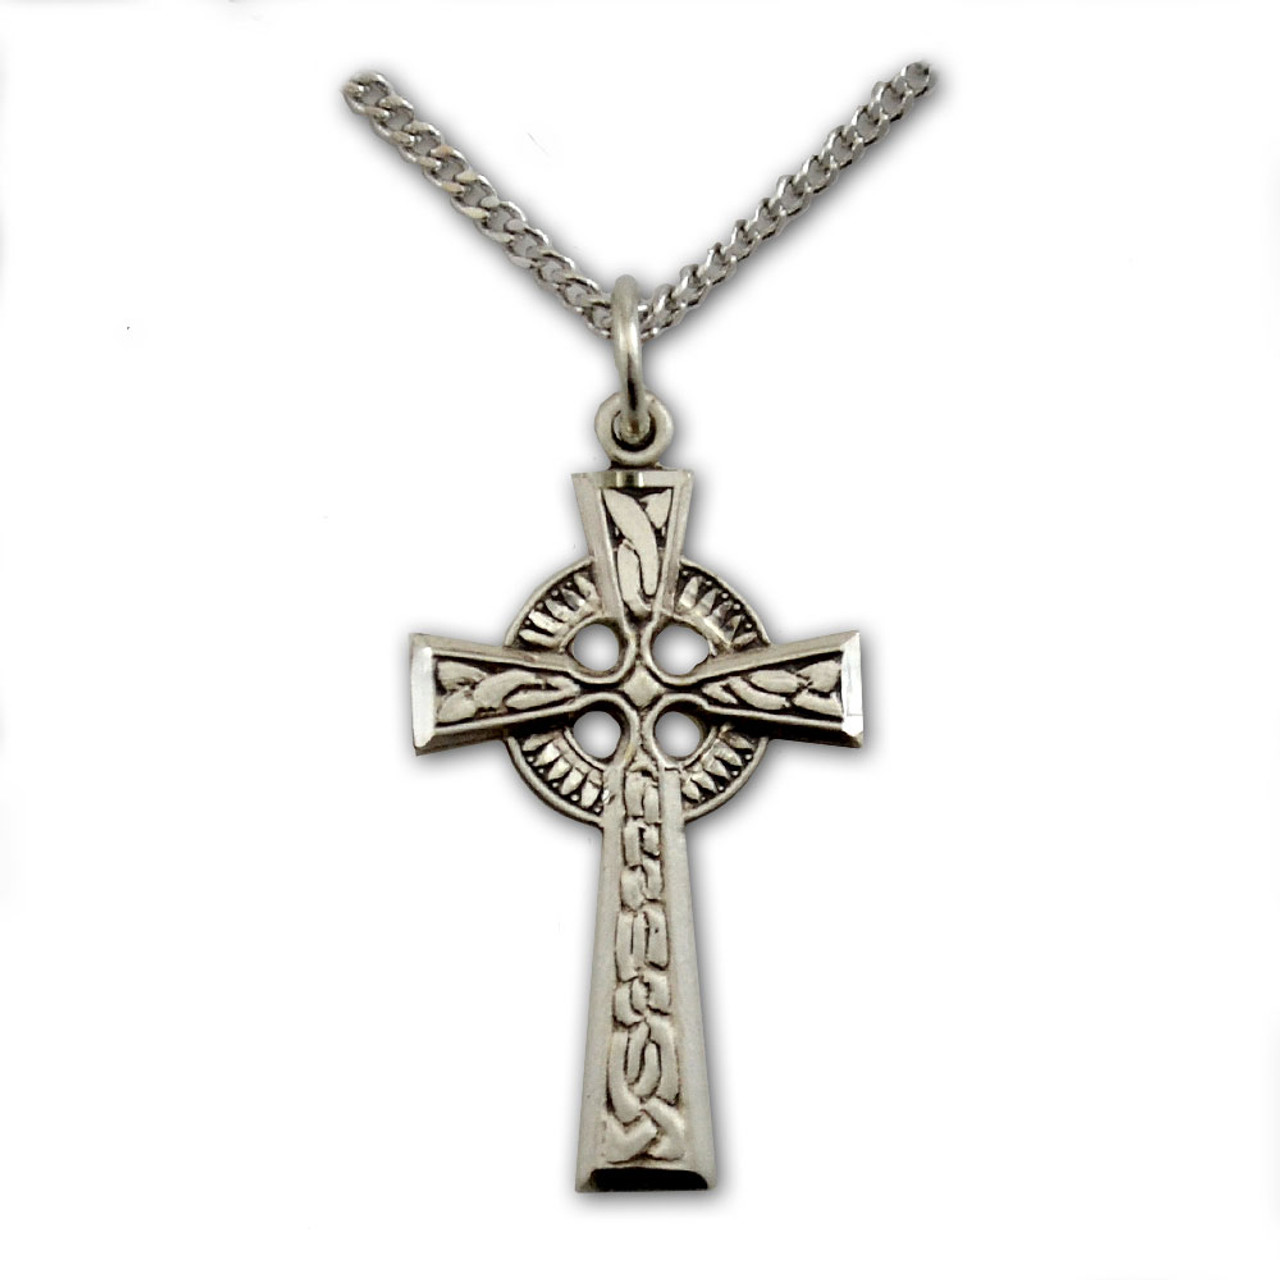 Silver Celtic Cross Necklace with an 18" Chain